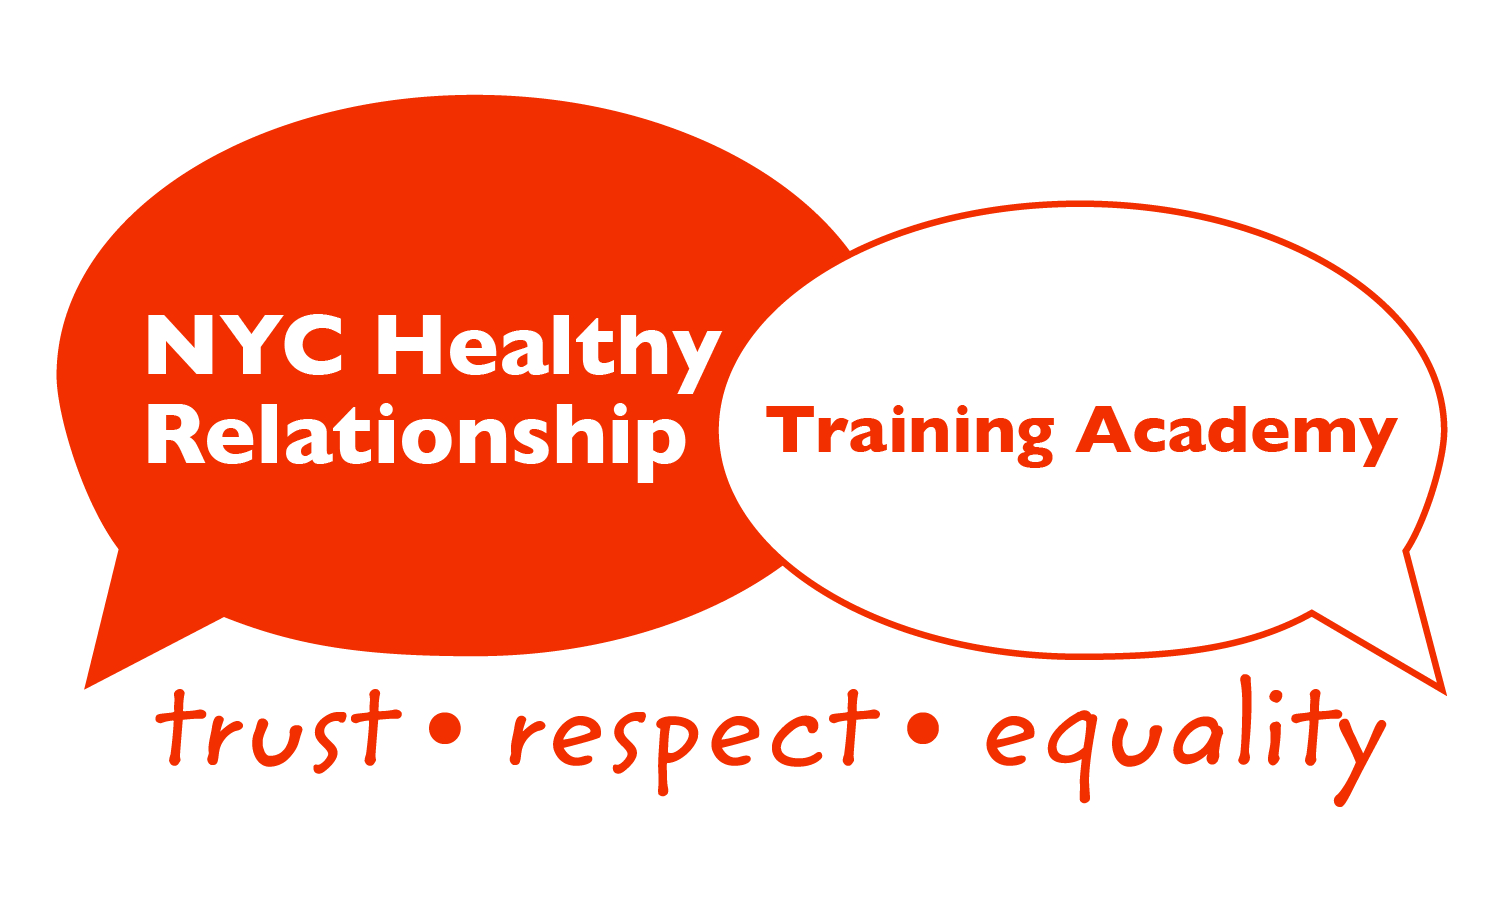 NYC Healthy Relationship Training Academy